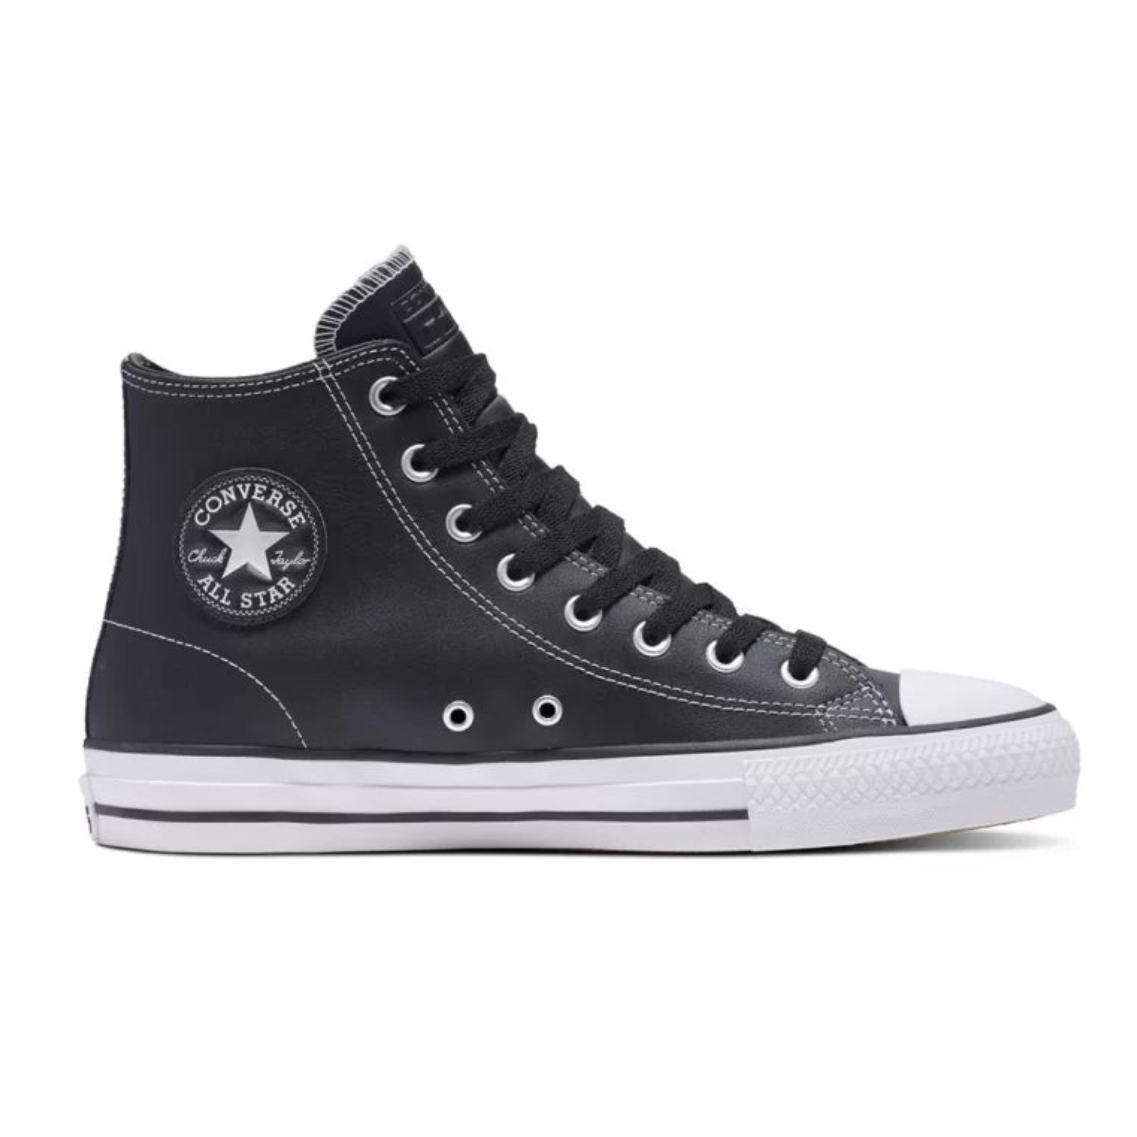 Converse CTAS Chuck Taylor All Star Leather - Black / White